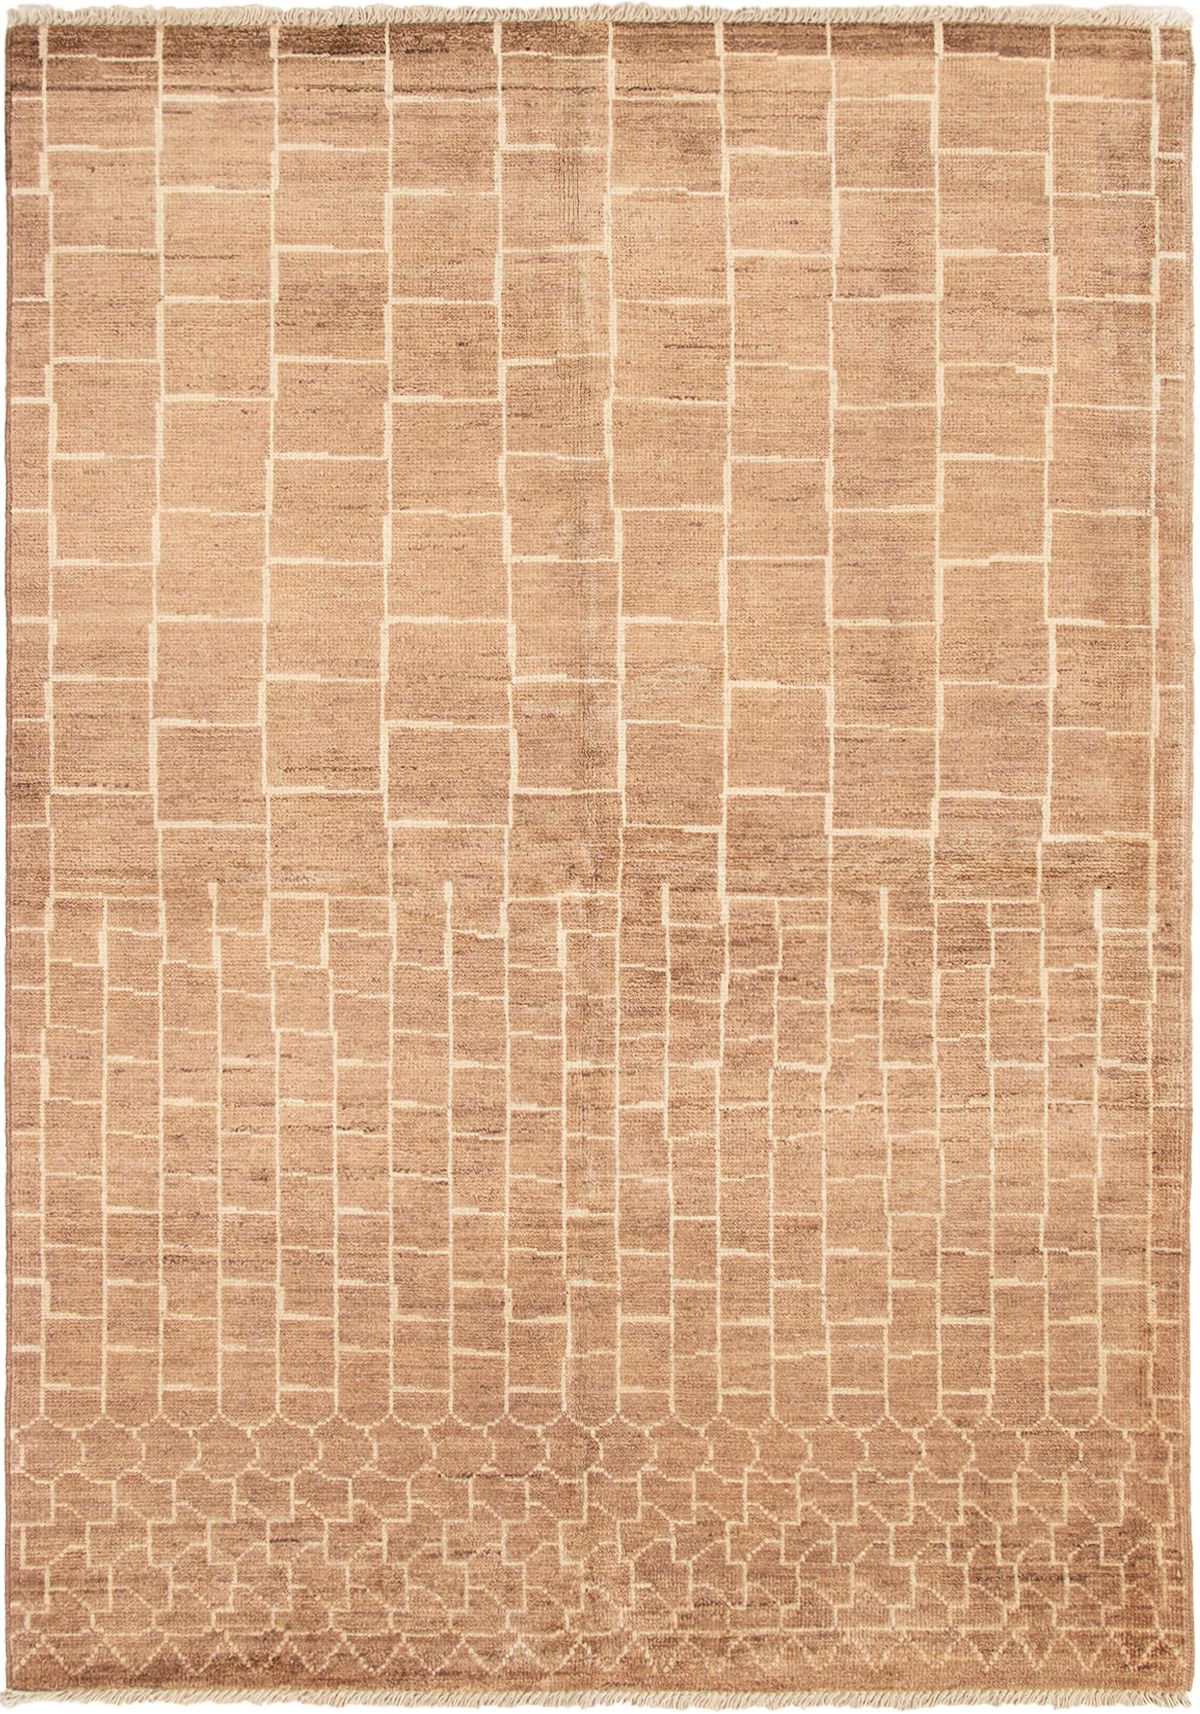 Hand-knotted Tangier Brown Wool Rug 6'3" x 8'10" Size: 6'3" x 8'10"  